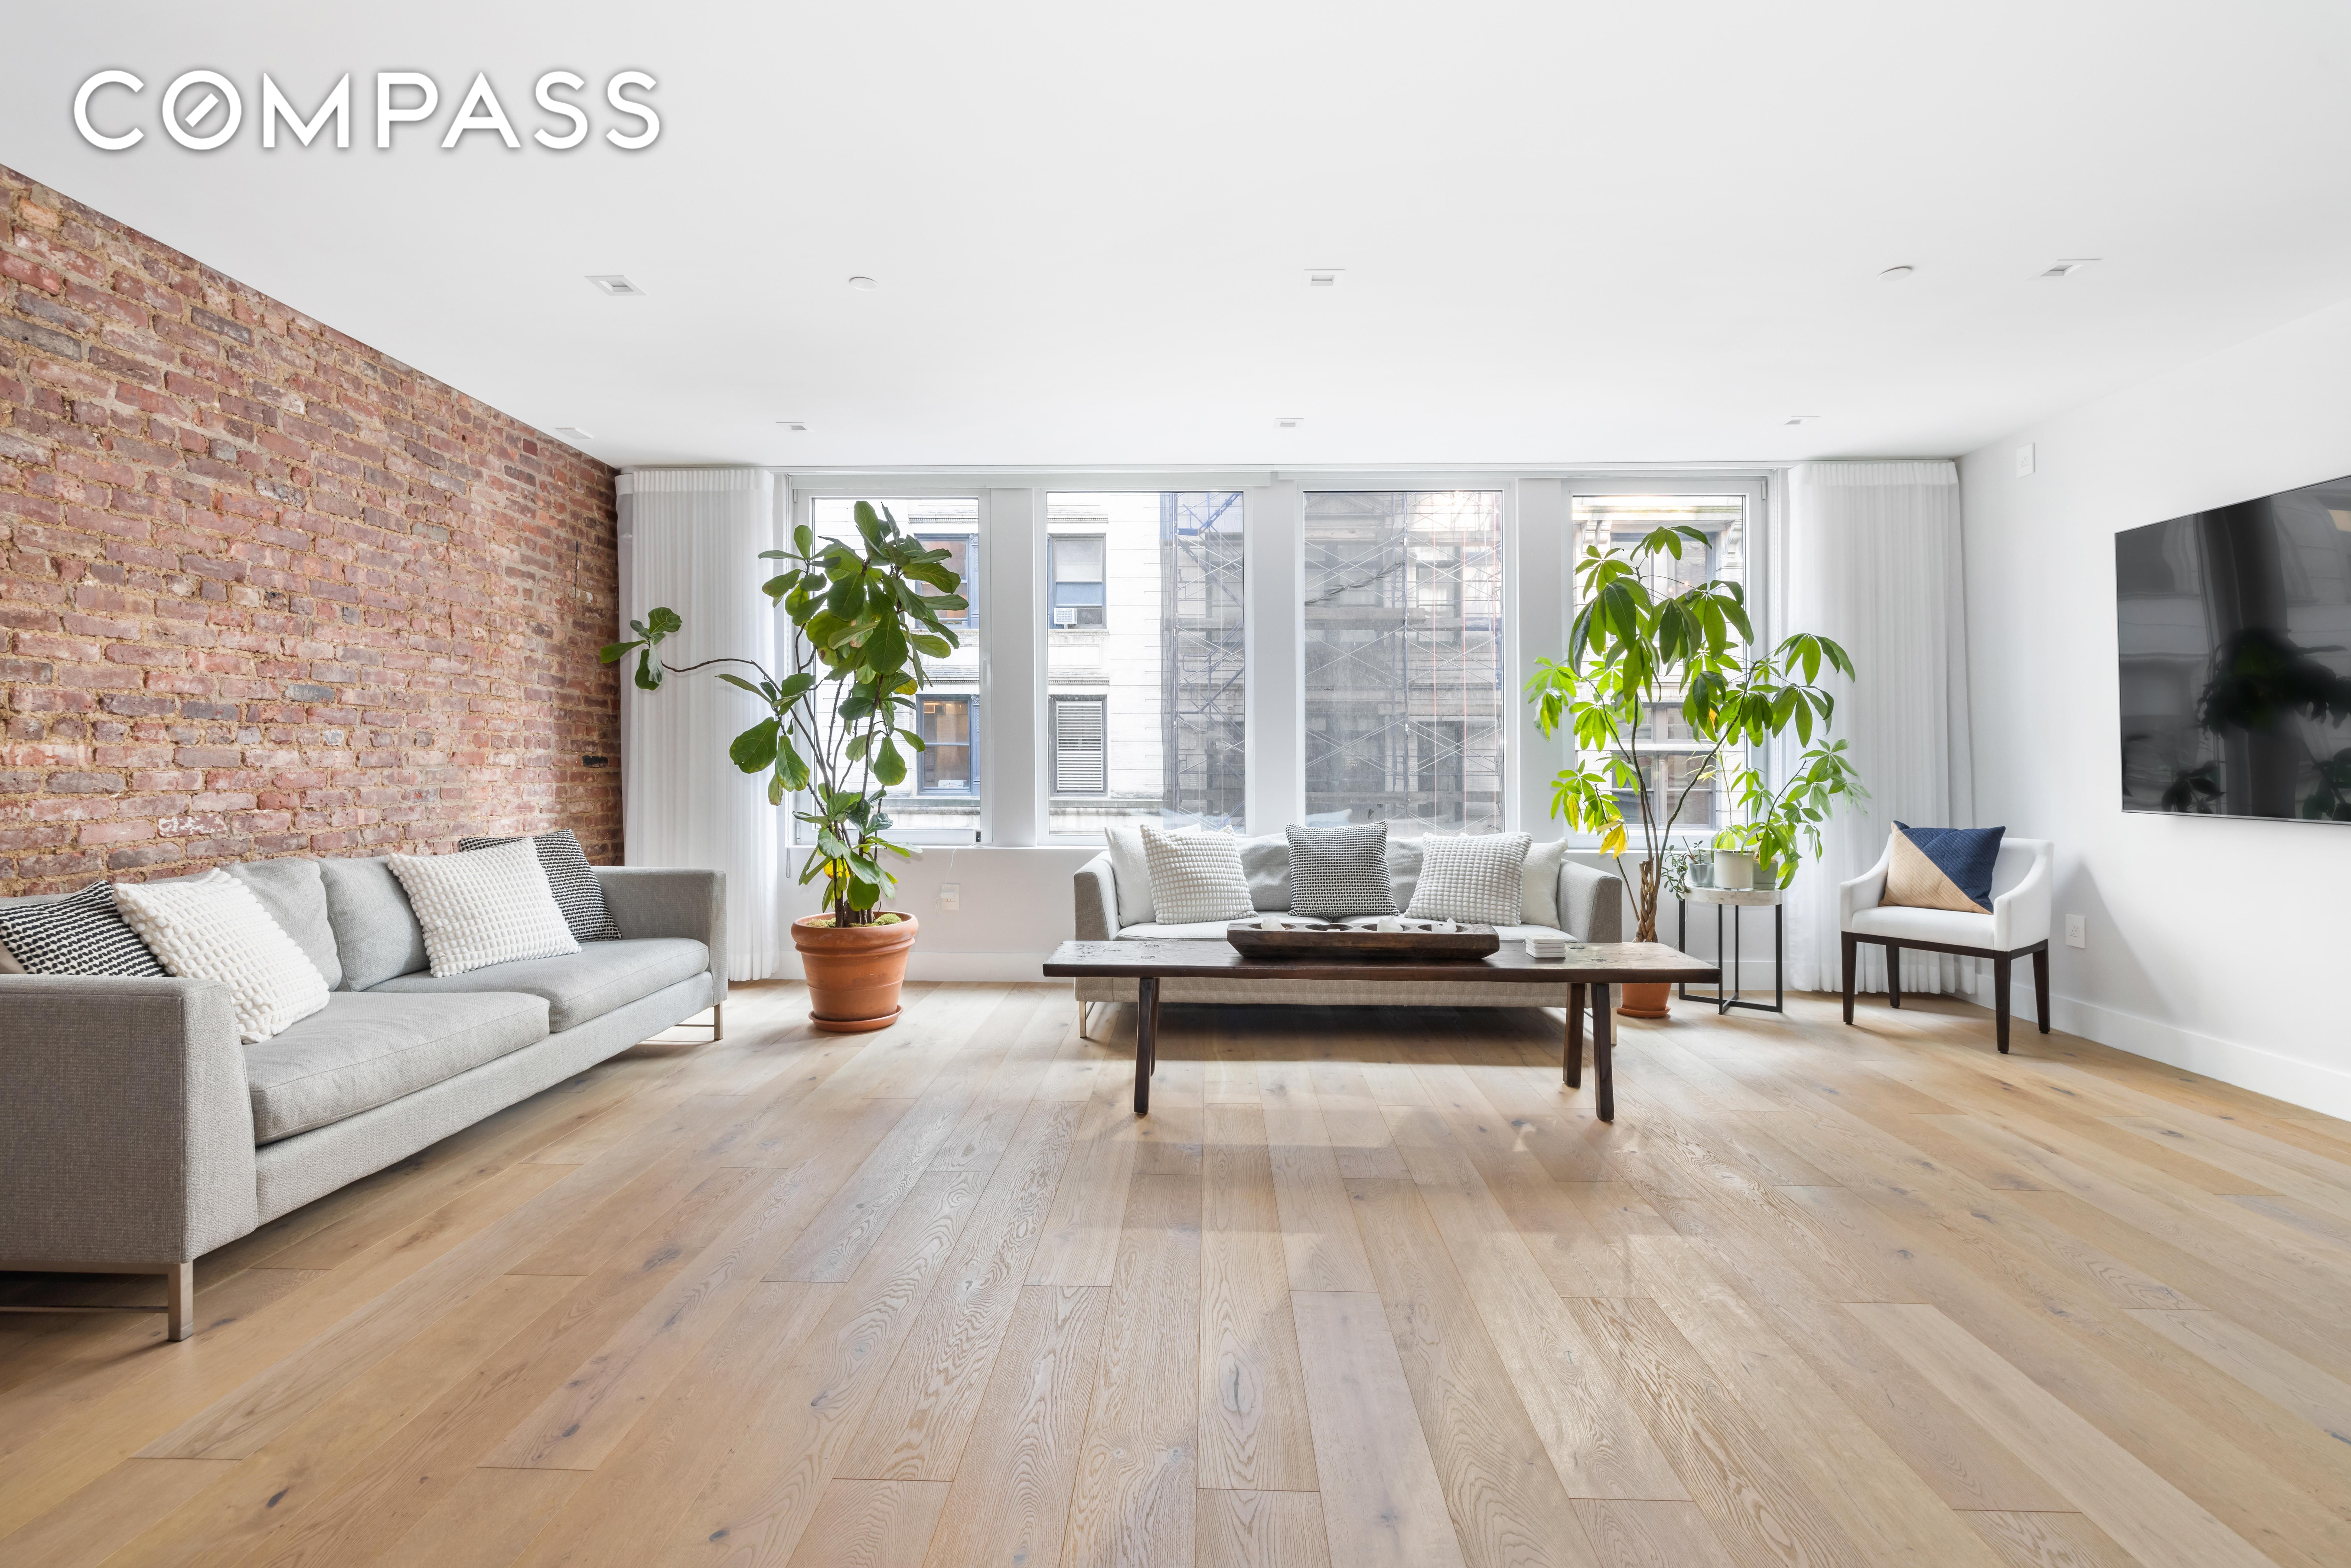 17 East 17th Street 4, Flatiron, Downtown, NYC - 2 Bedrooms  

4 Rooms - 